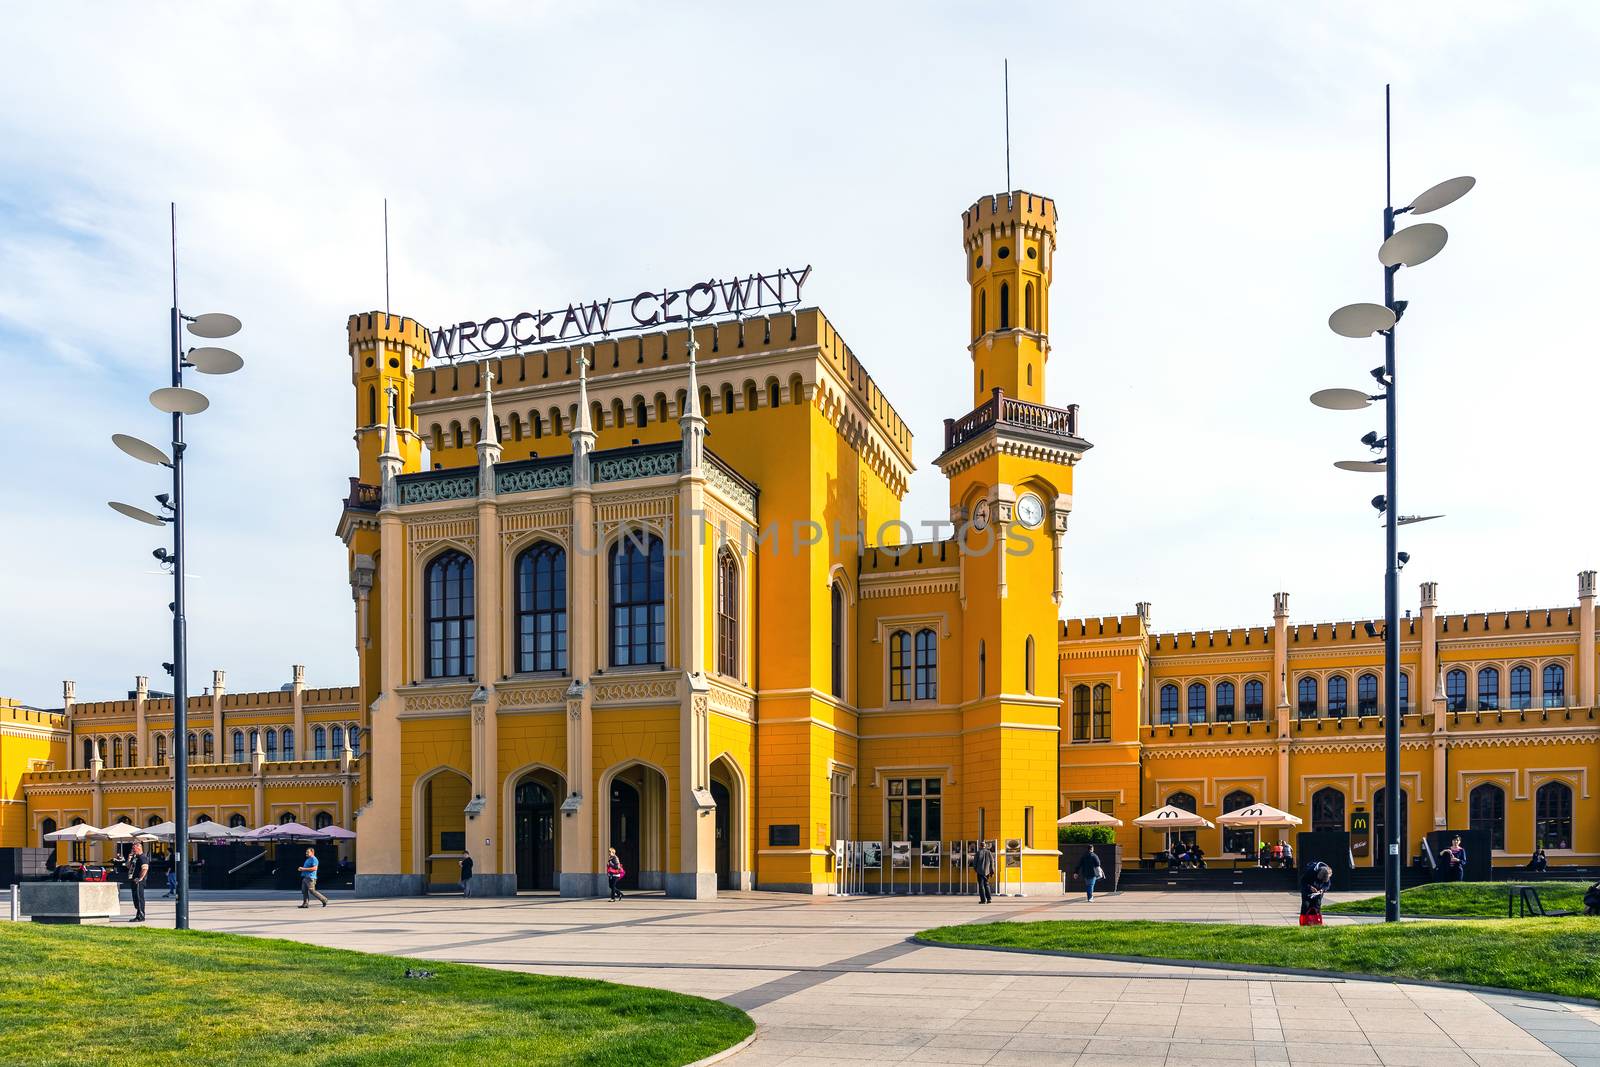 Wroclaw Main Railway Station, located in the 19th century building recently generally renovated,  the largest railway station of the Lower Silesian Voivodeship.